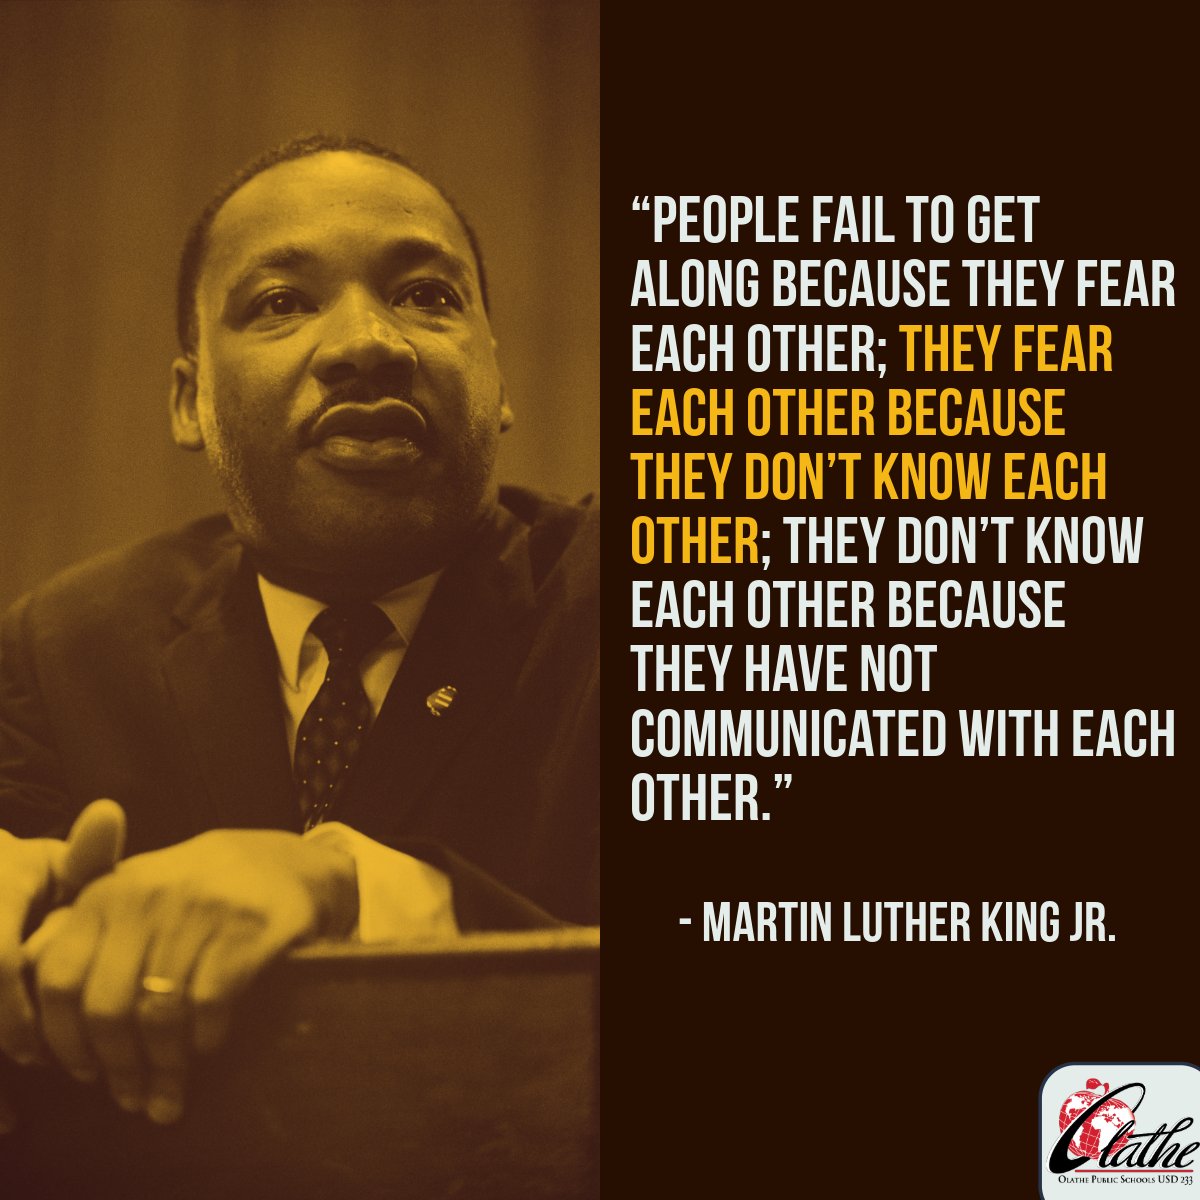 “People fail to get along because they fear each other; they fear each other because they don’t know each other; they don’t know each other because they have not communicated with each other.” Olathe Public Schools is closed today to honor the legacy of Martin Luther King Jr.…